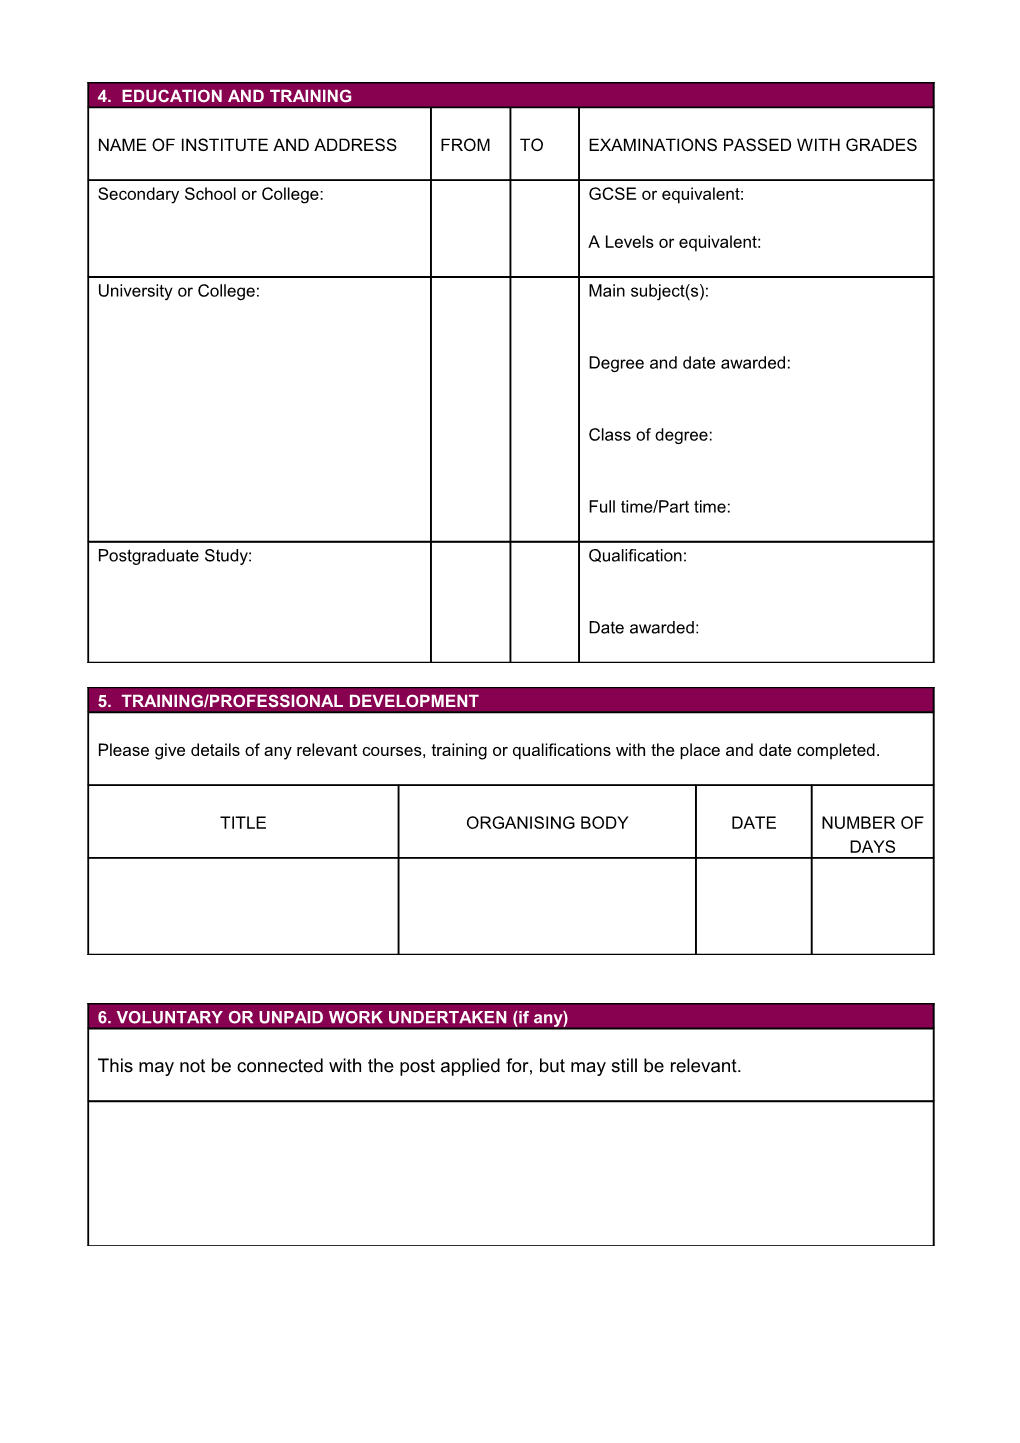 Please Complete This Form in Full, As Cvs Are Not Accepted